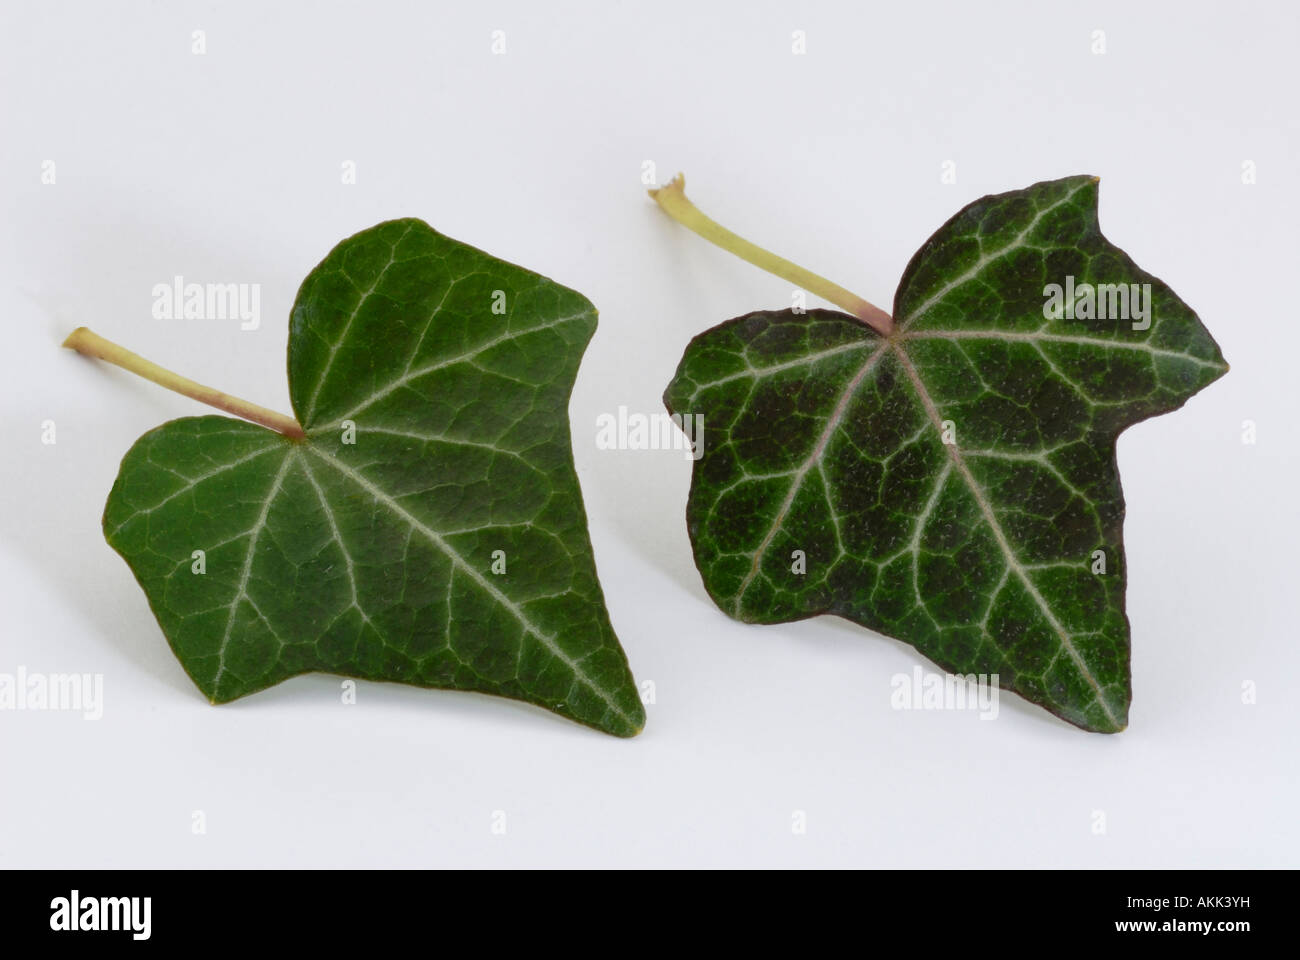 Common Ivy, English Ivy (Hedera helix), leaves, studio picture Stock Photo